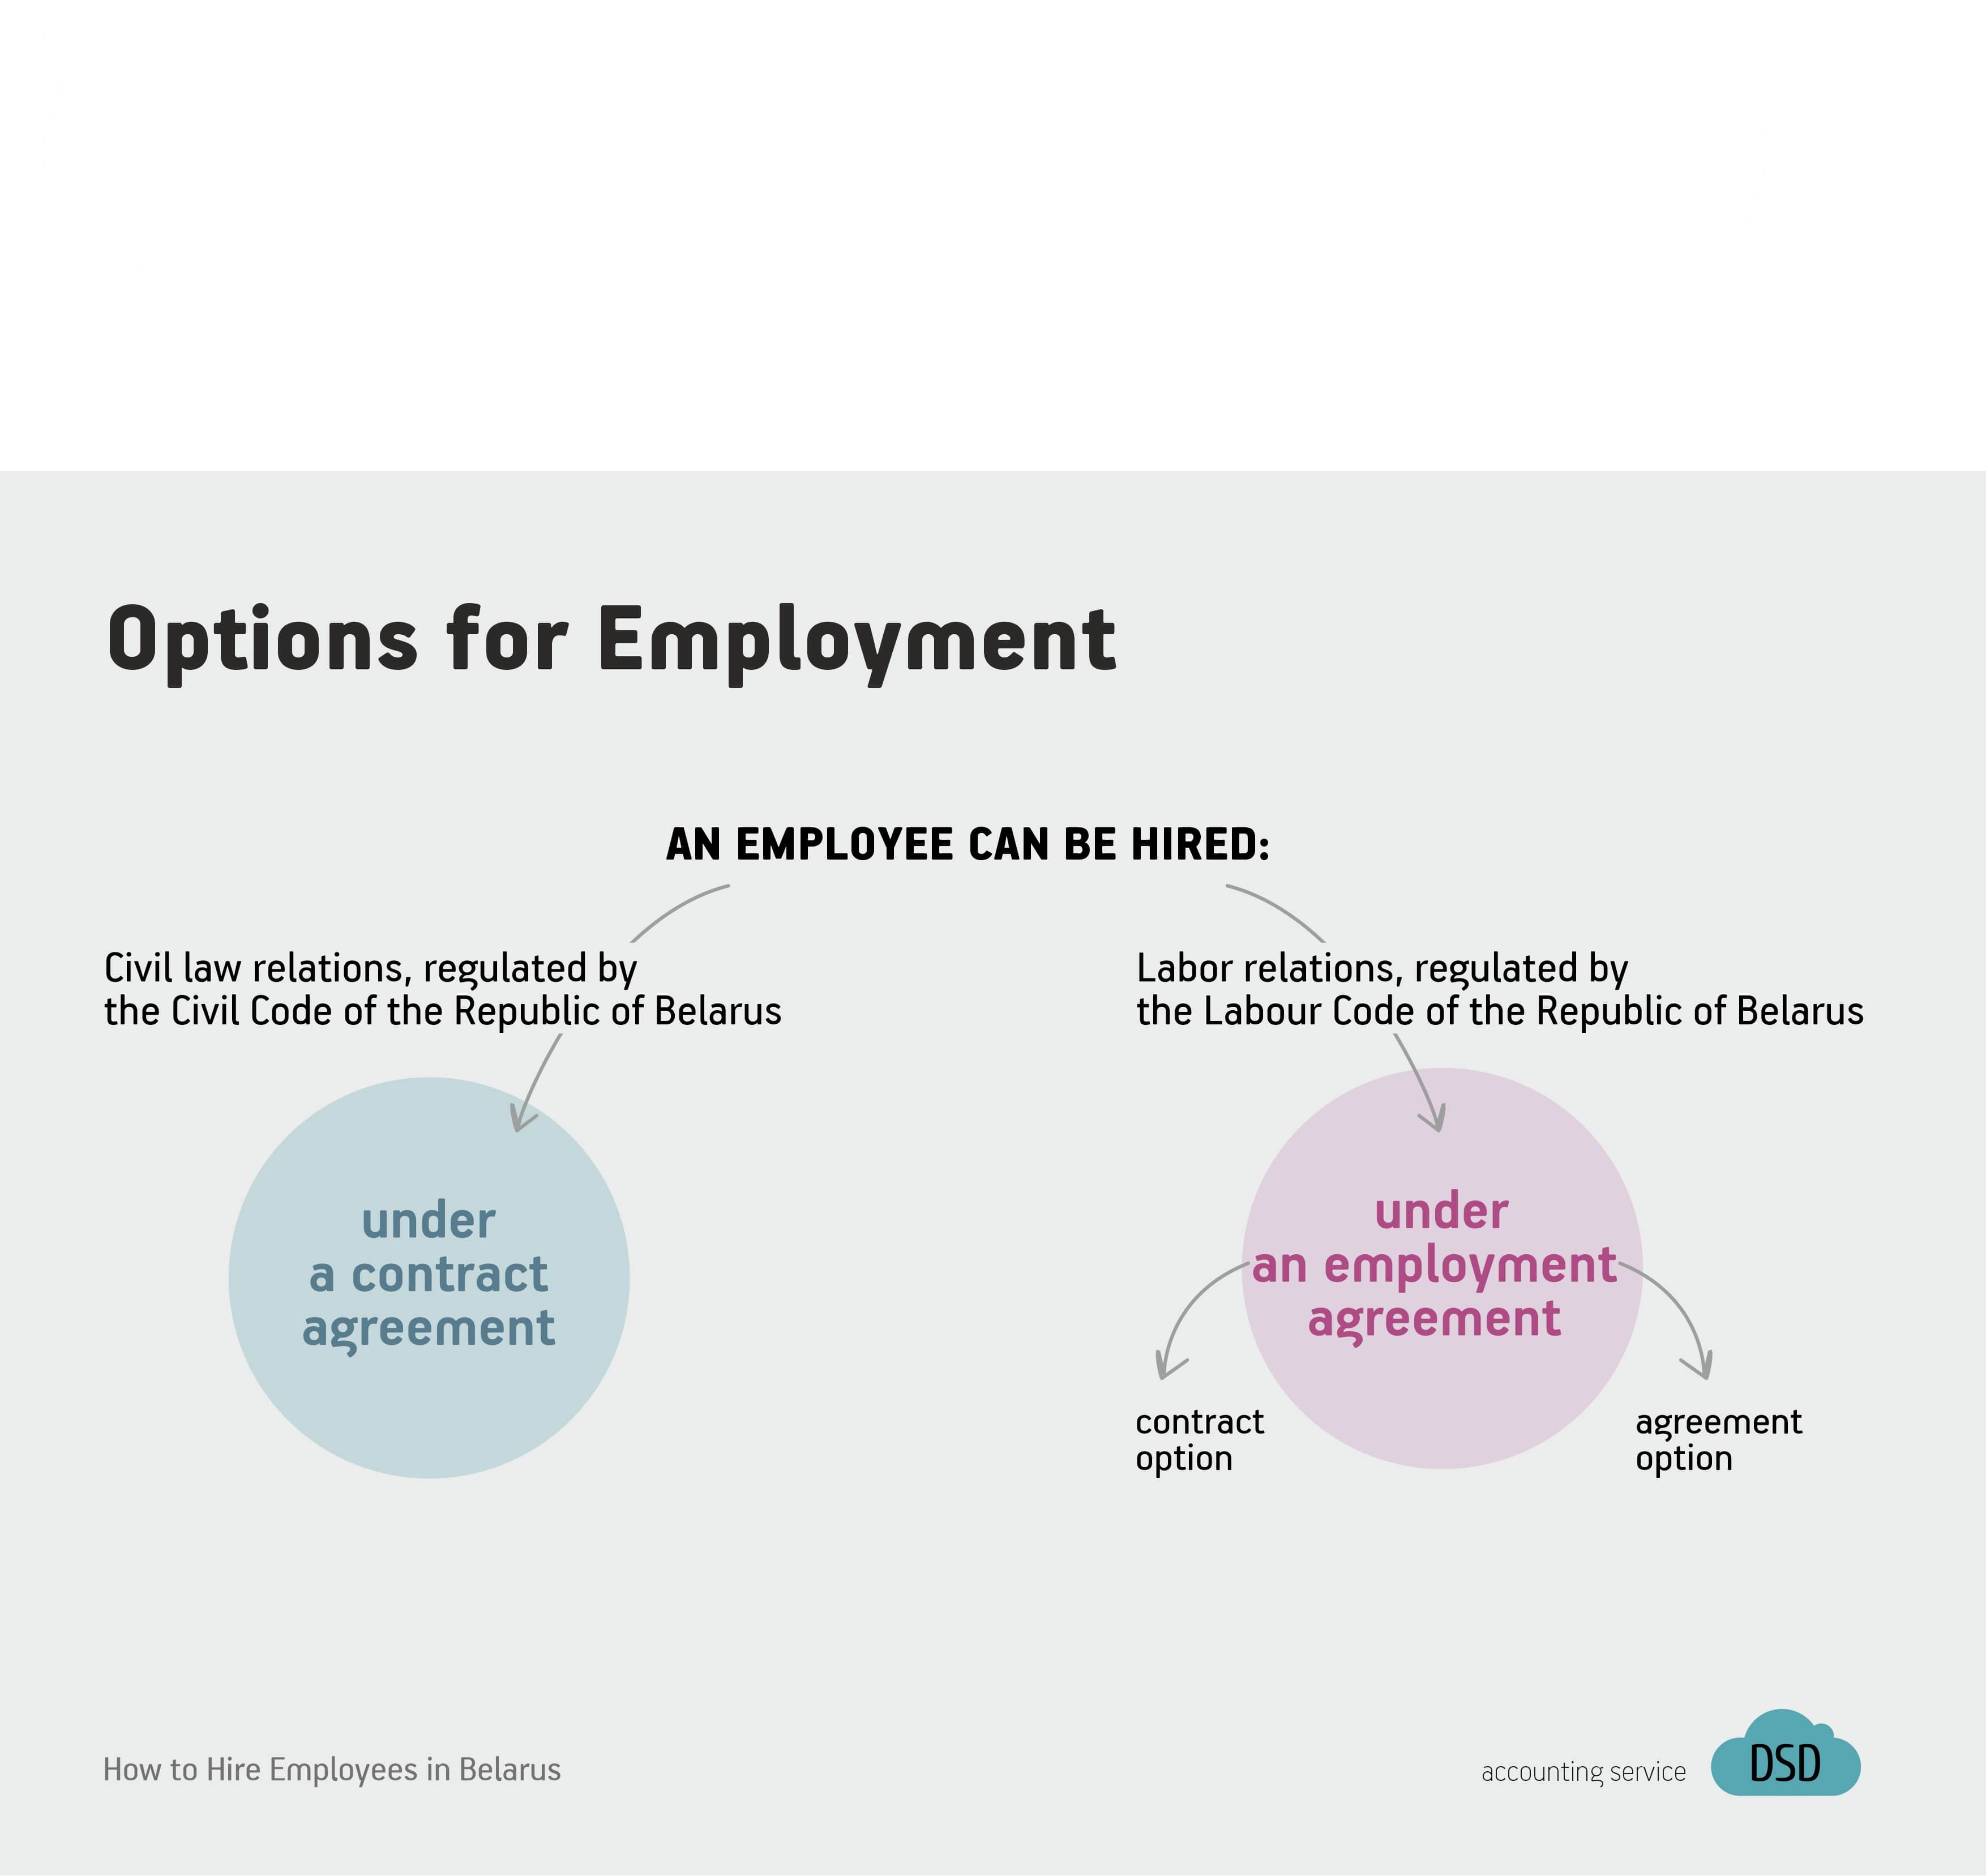 Options for employment in Belarus